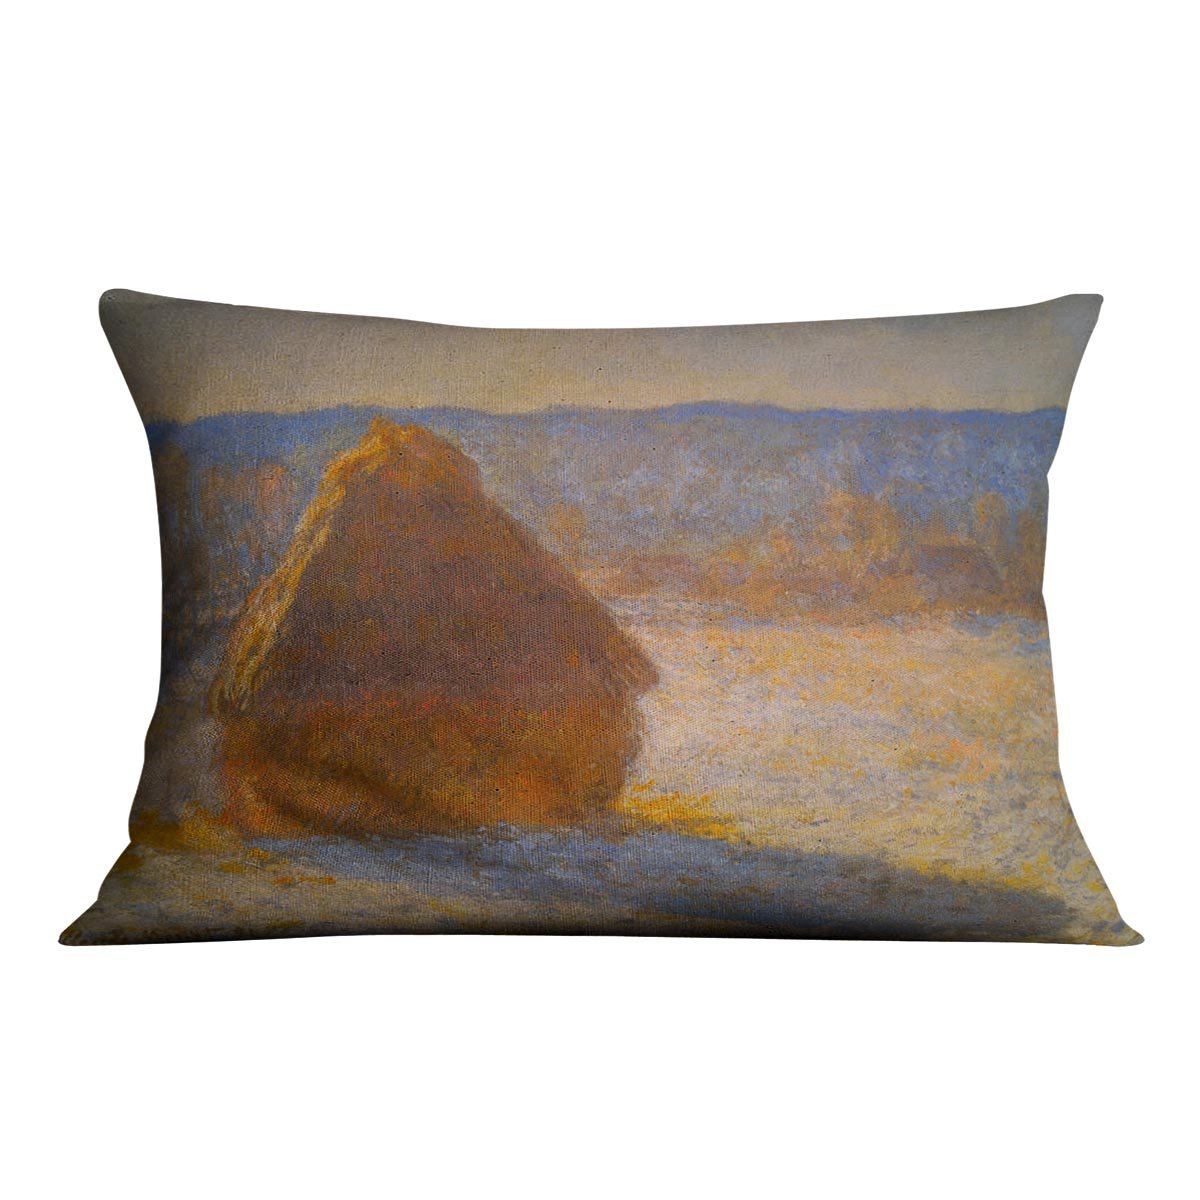 Haystacks in Snow by Monet Throw Pillow